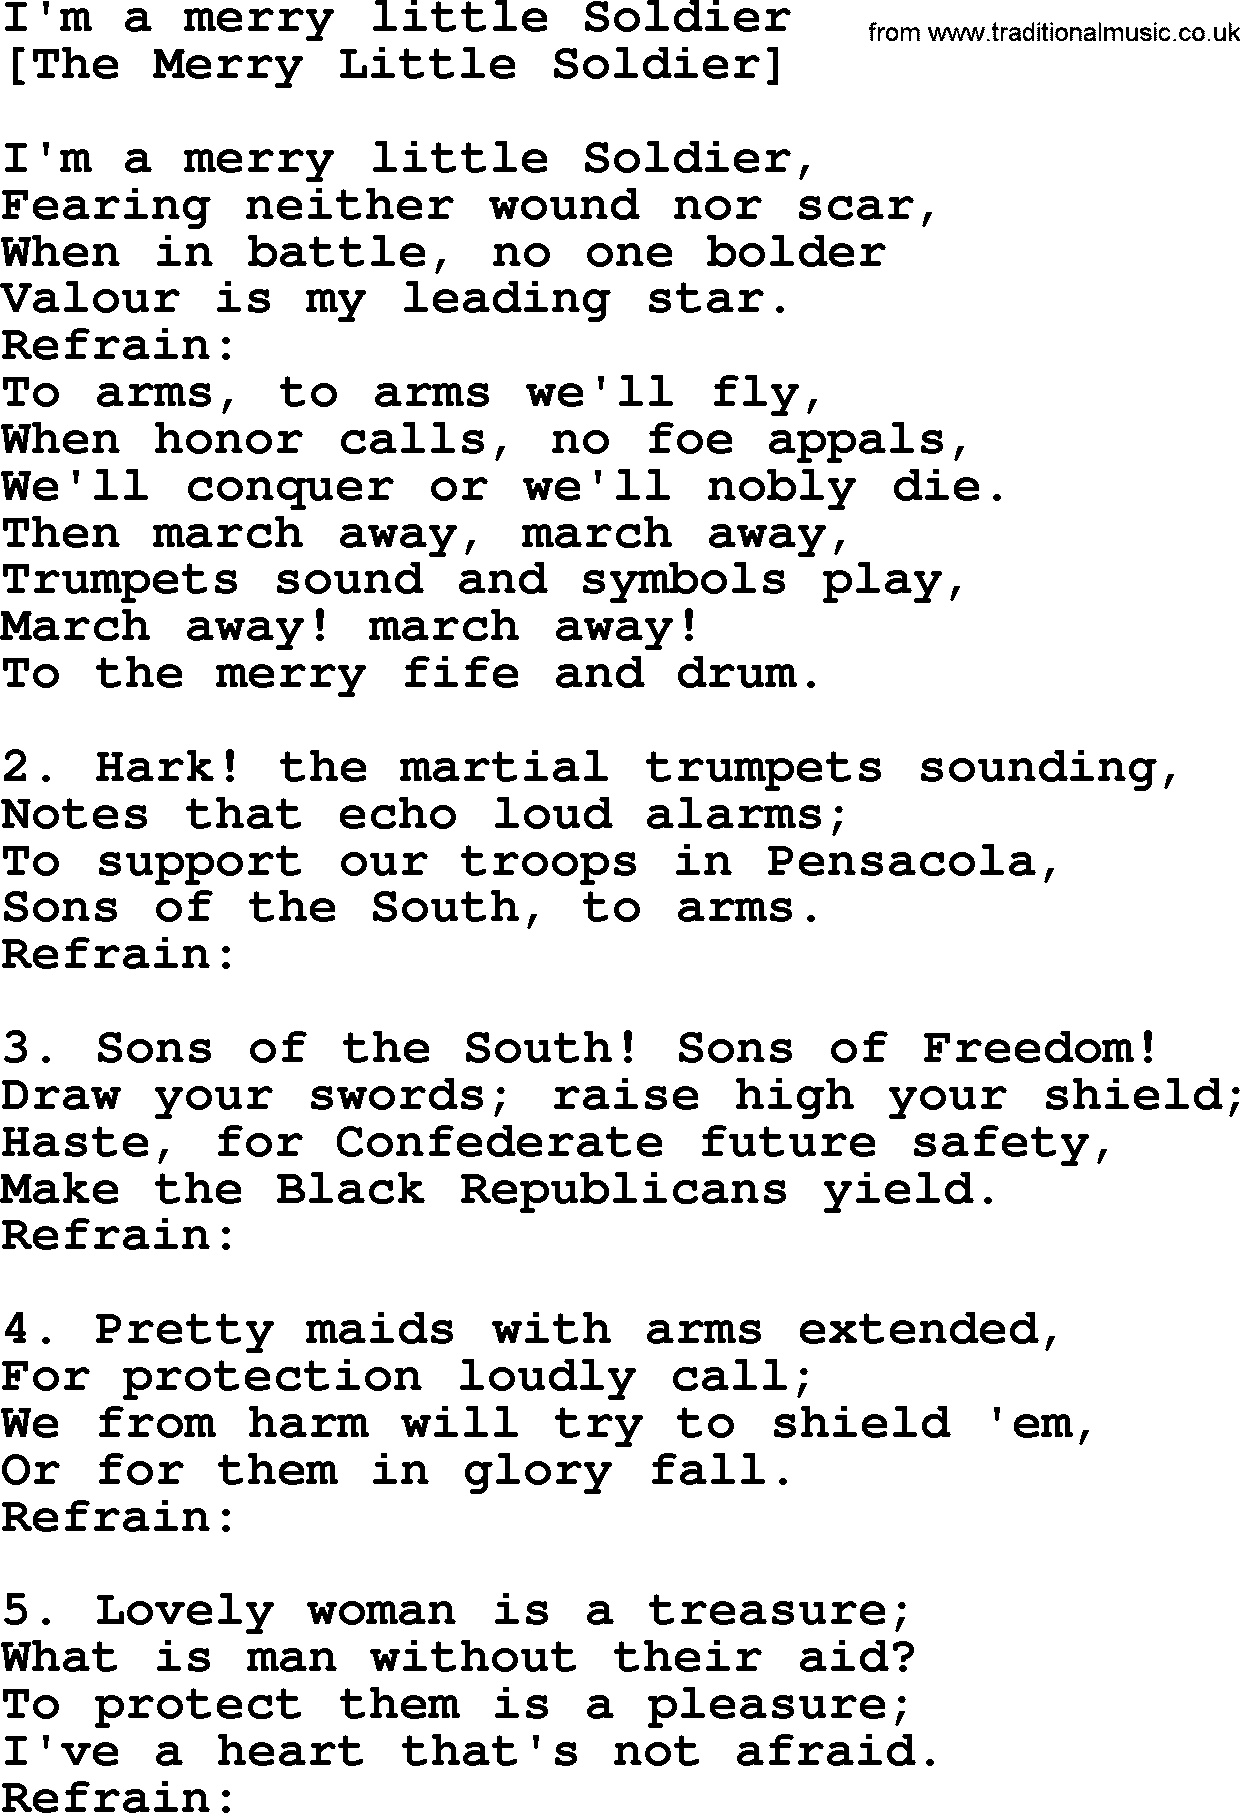 Old American Song: I'm A Merry Little Soldier, lyrics